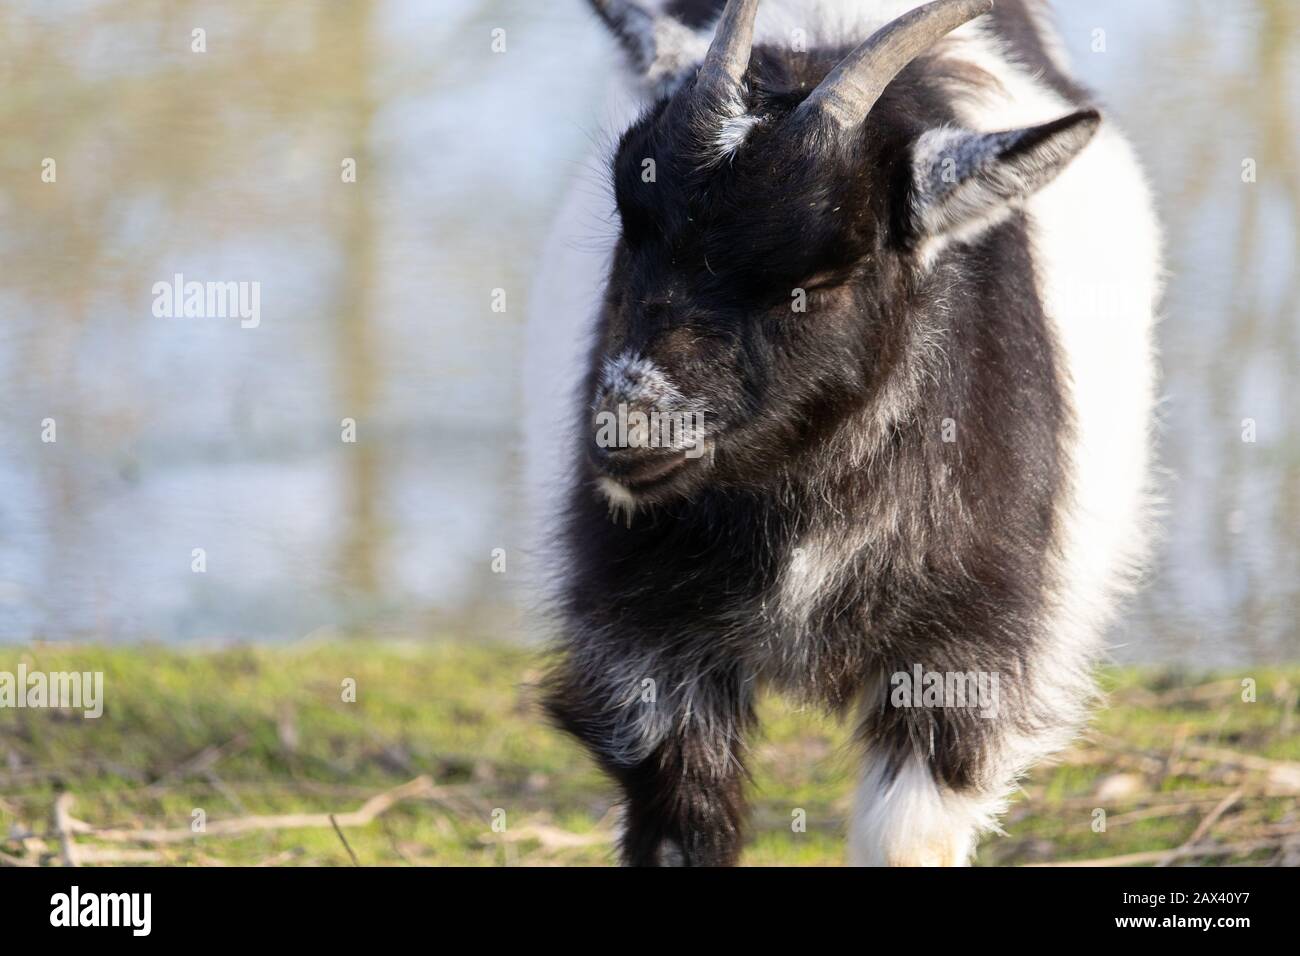 Funny black and white goat happily running with close eyes in an animal sanctuary Stock Photo